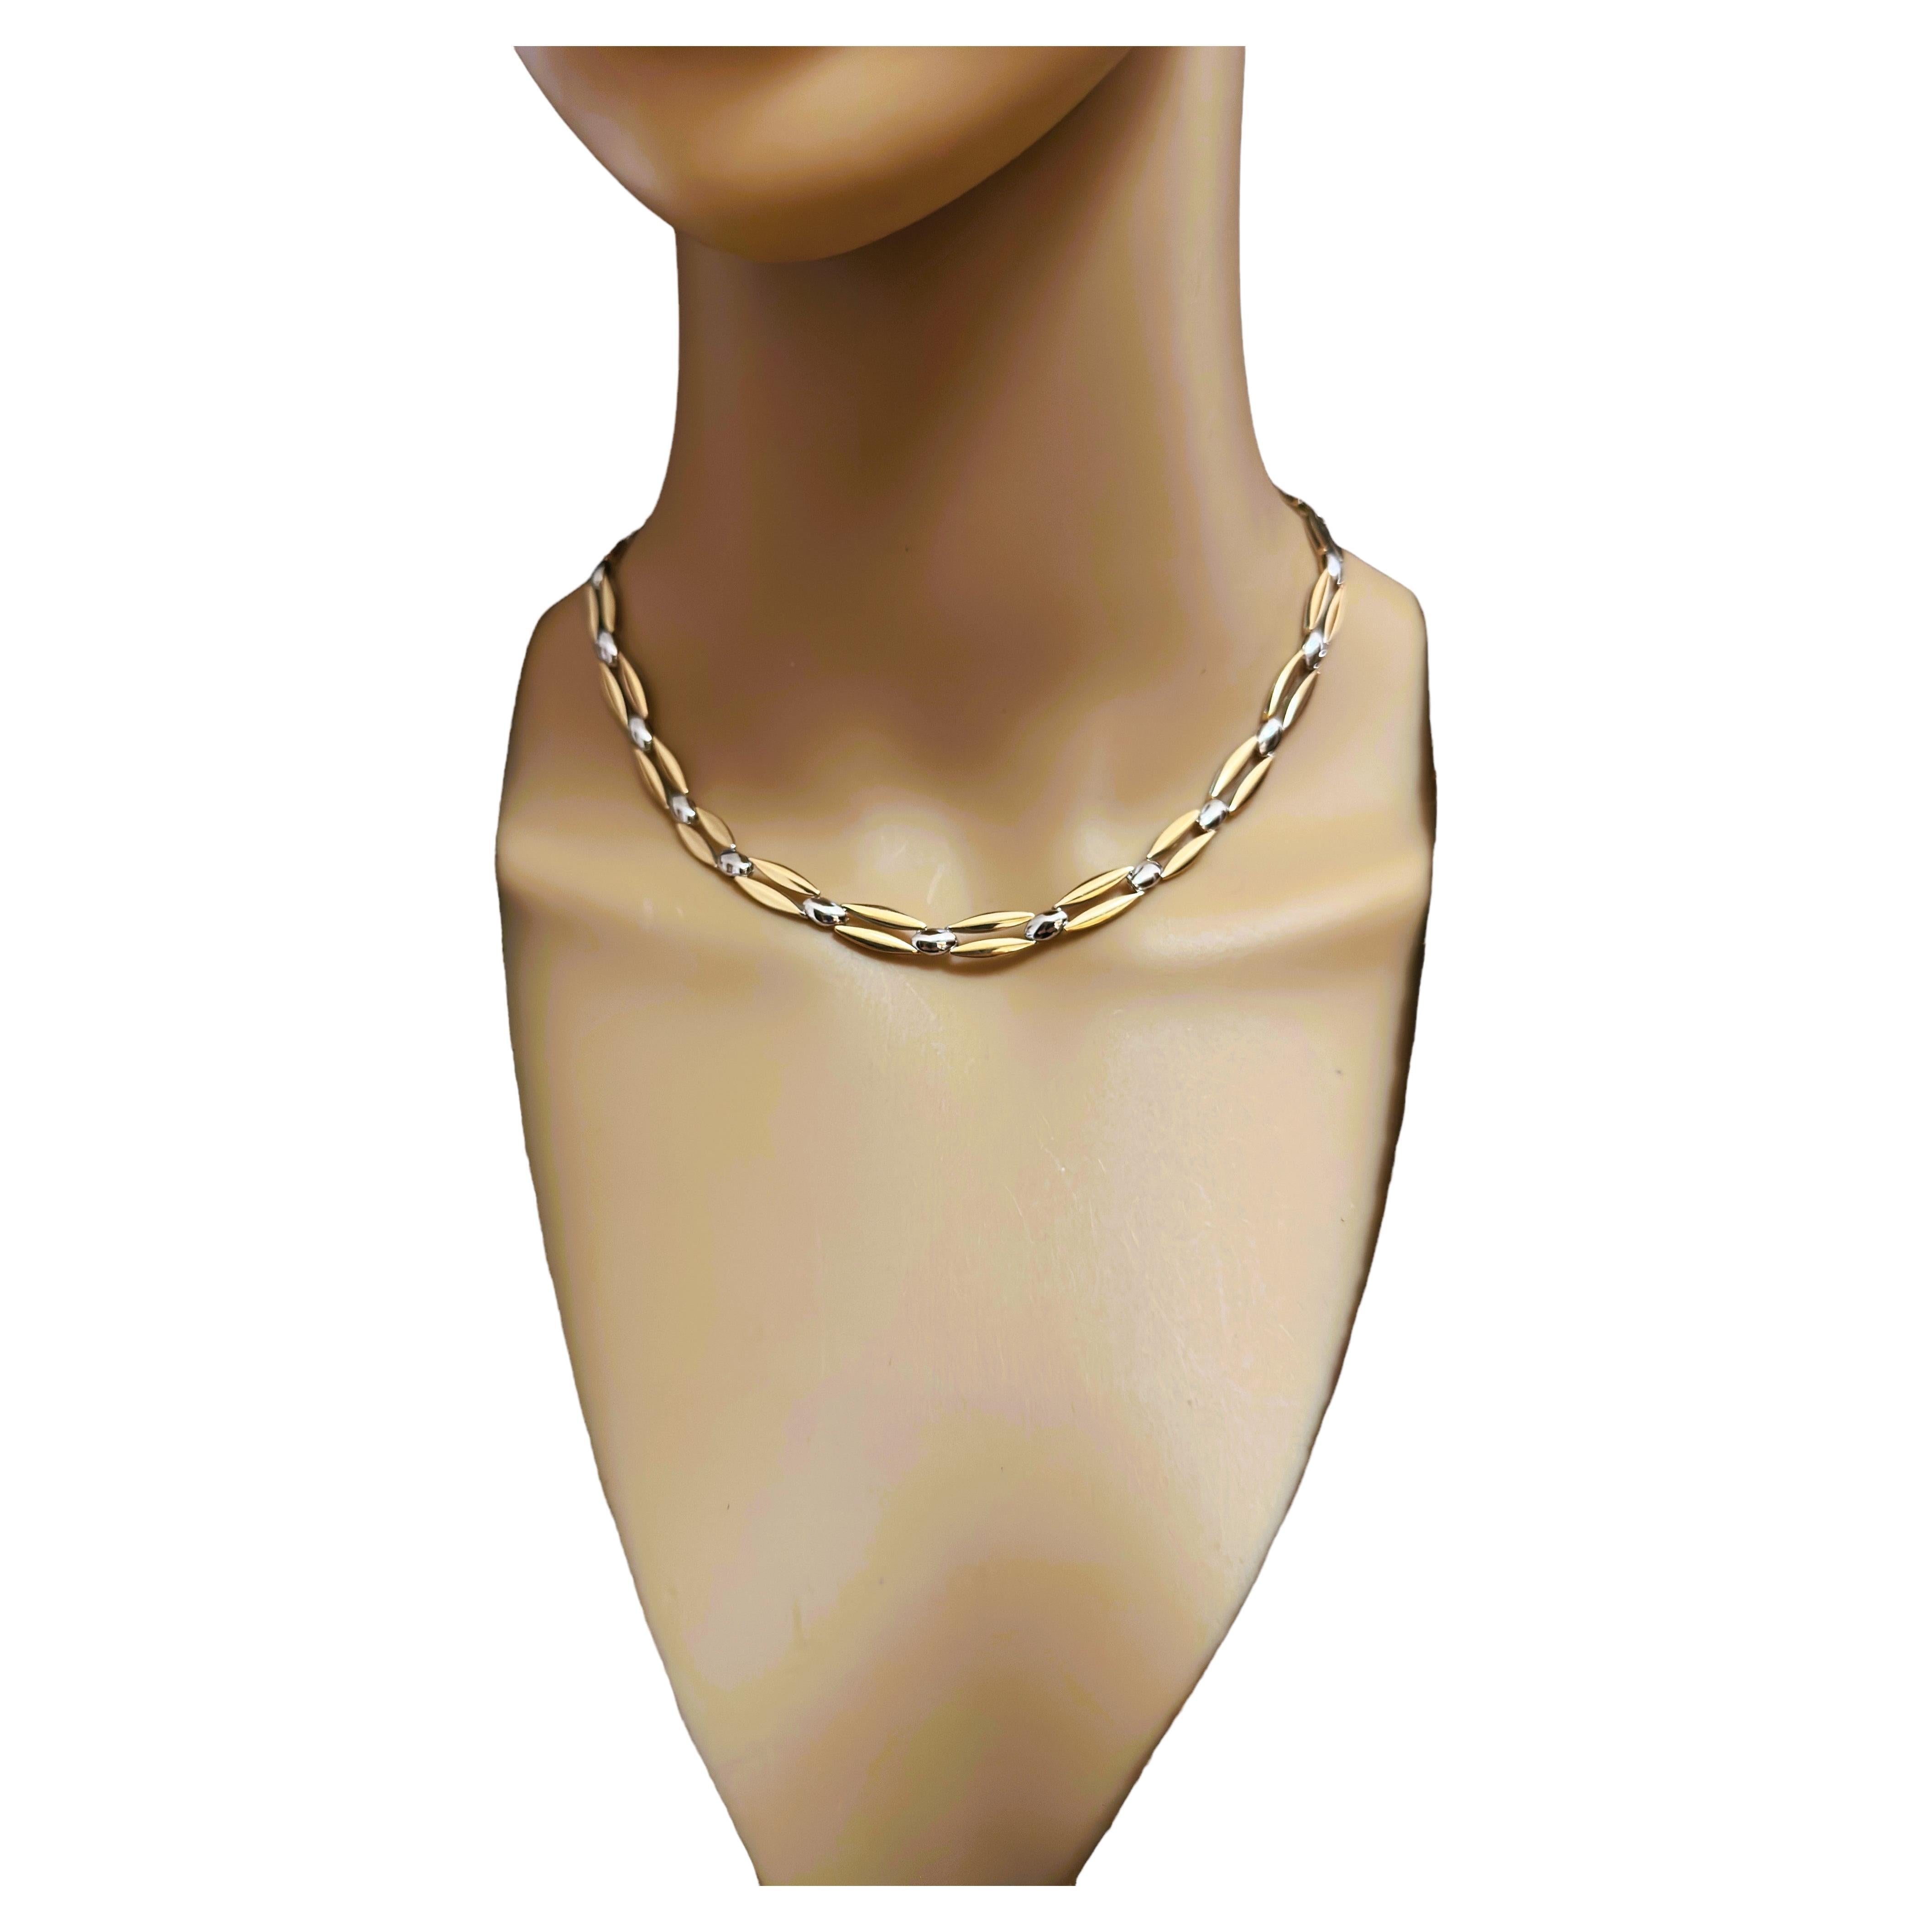 This necklace is just gorgeous.  I love the design.  It is such a quality made piece by Unoaerre Italian Jewelry Makers and so versatile.  You can wear it on the side where it's 2-tone Yellow and White Gold or the other side which is just Yellow